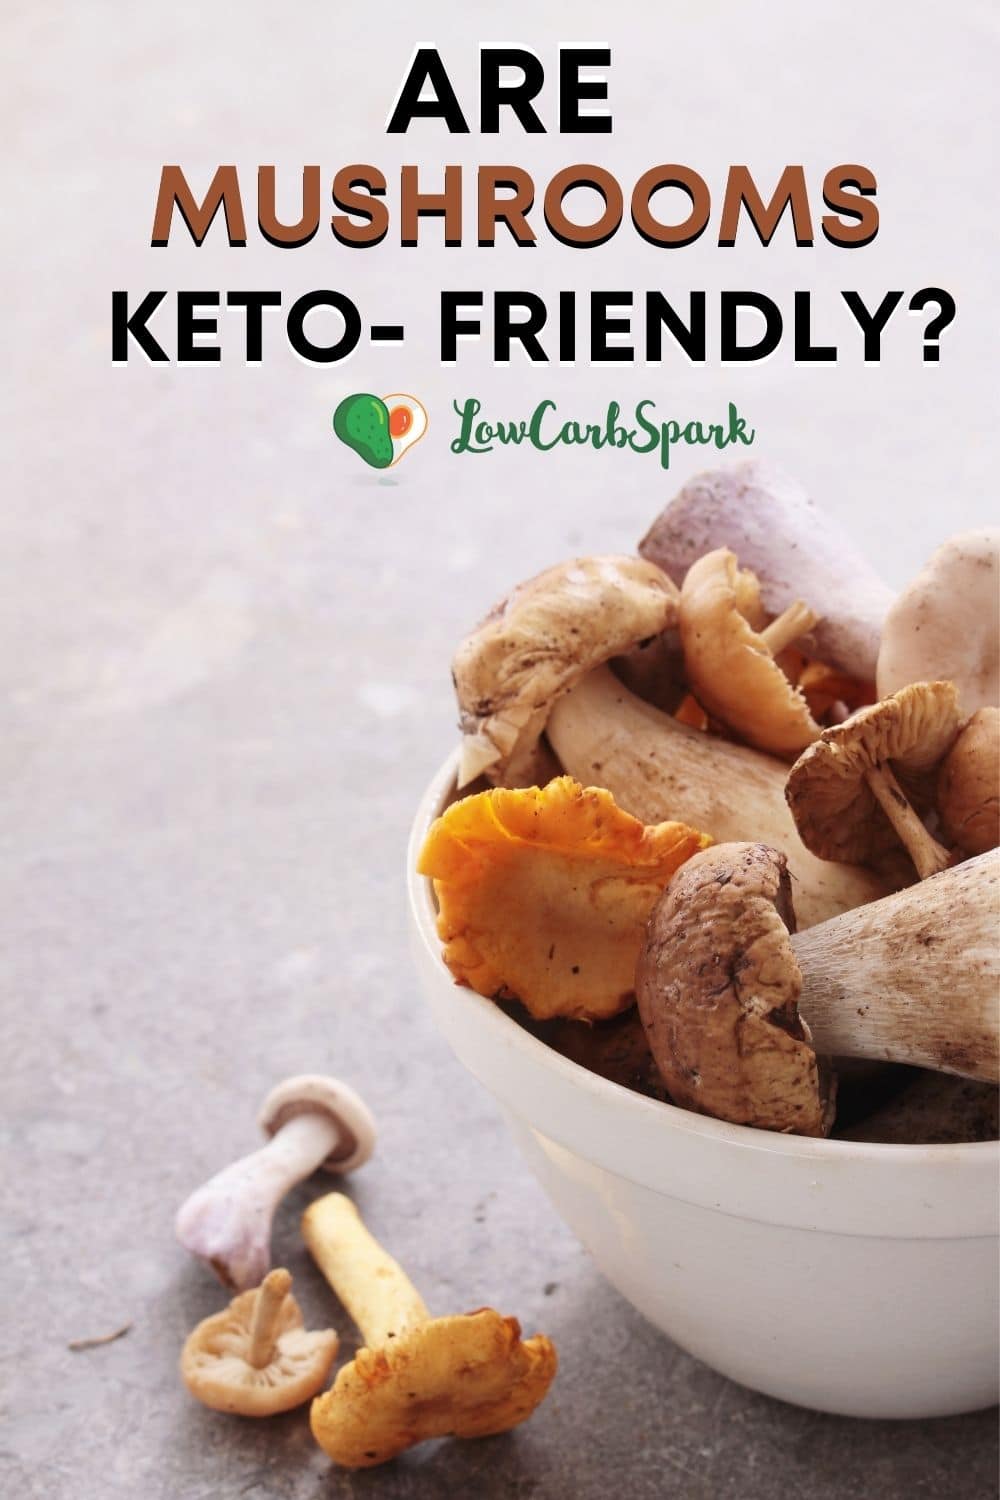 One of the reasons why mushrooms are keto-friendly is because they are low in carbohydrates. Carbohydrates are typically restricted on a keto diet, as they can raise blood sugar levels and kick you out of ketosis. Thankfully, mushrooms are low in carbs, making them a great option for those following a keto lifestyle.